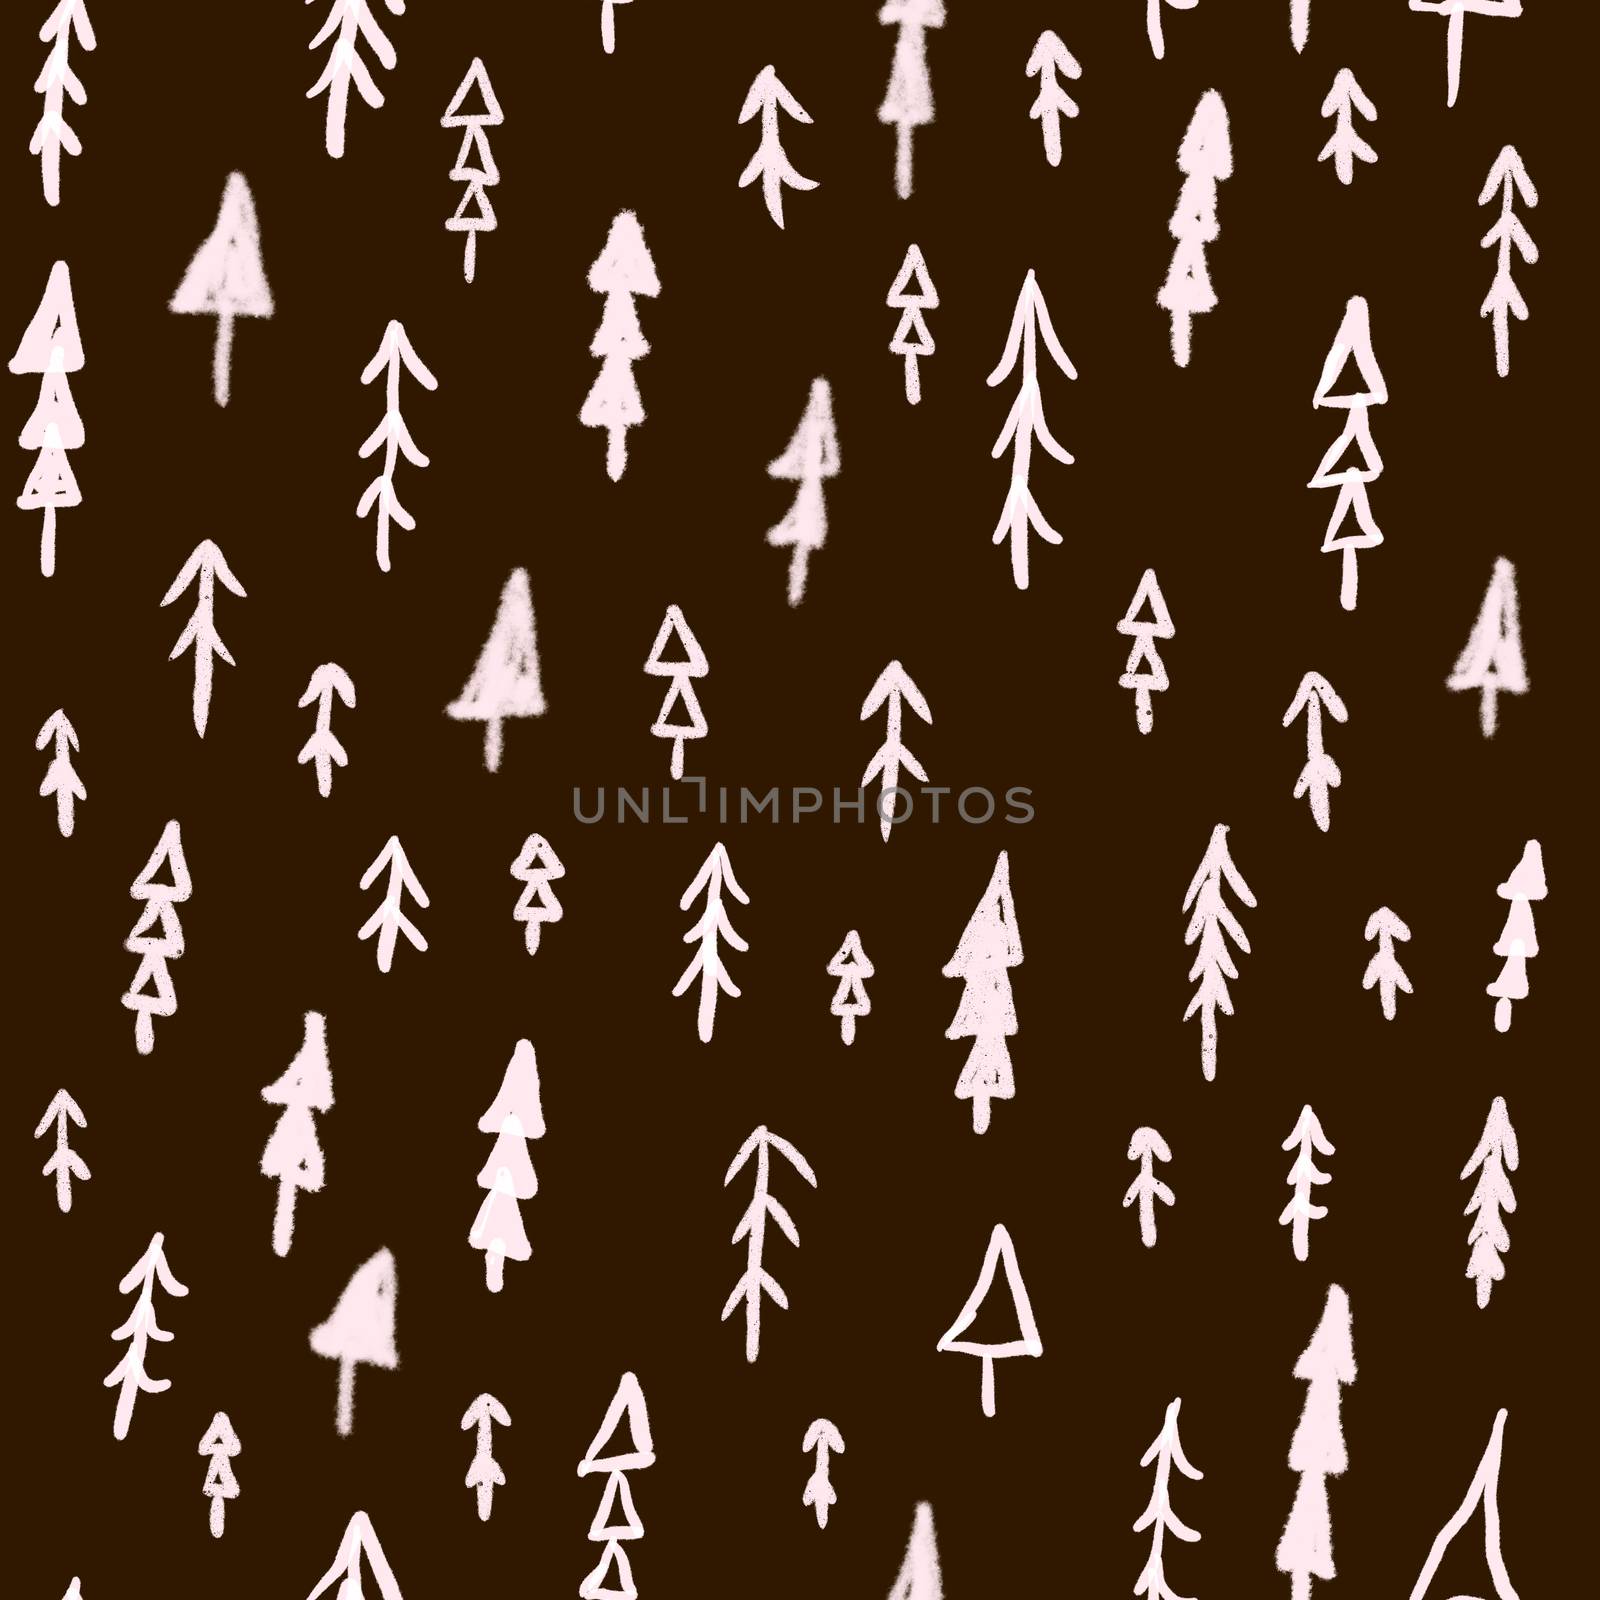 Hand drawn Christmas tree seamless pattern on black background. Festive endless background. Doodle ink repeat pattern design for for scrapbooking, cards, wrapping paper, wallpaper.